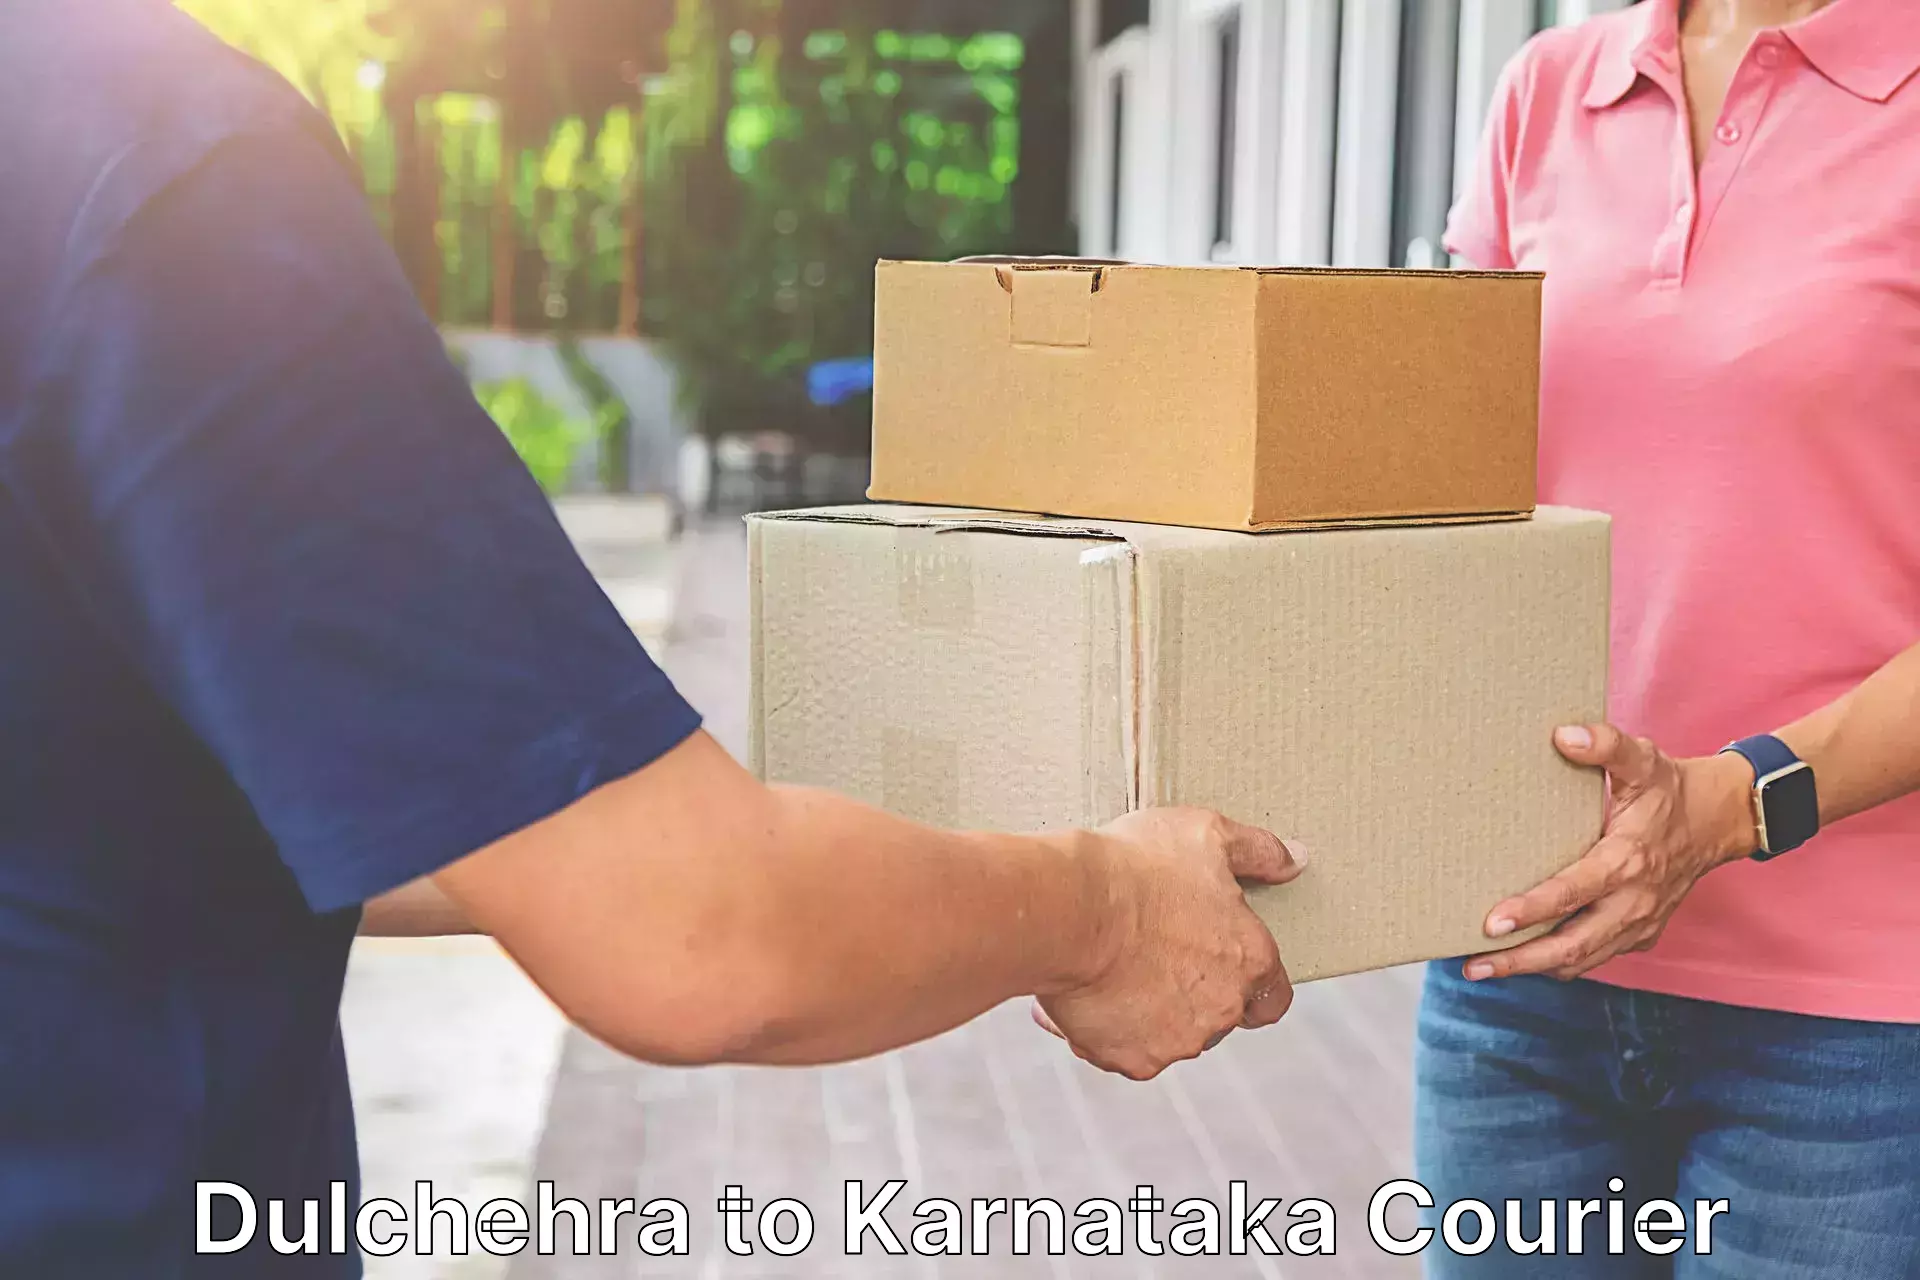 Postal and courier services Dulchehra to Hoovina Hadagali